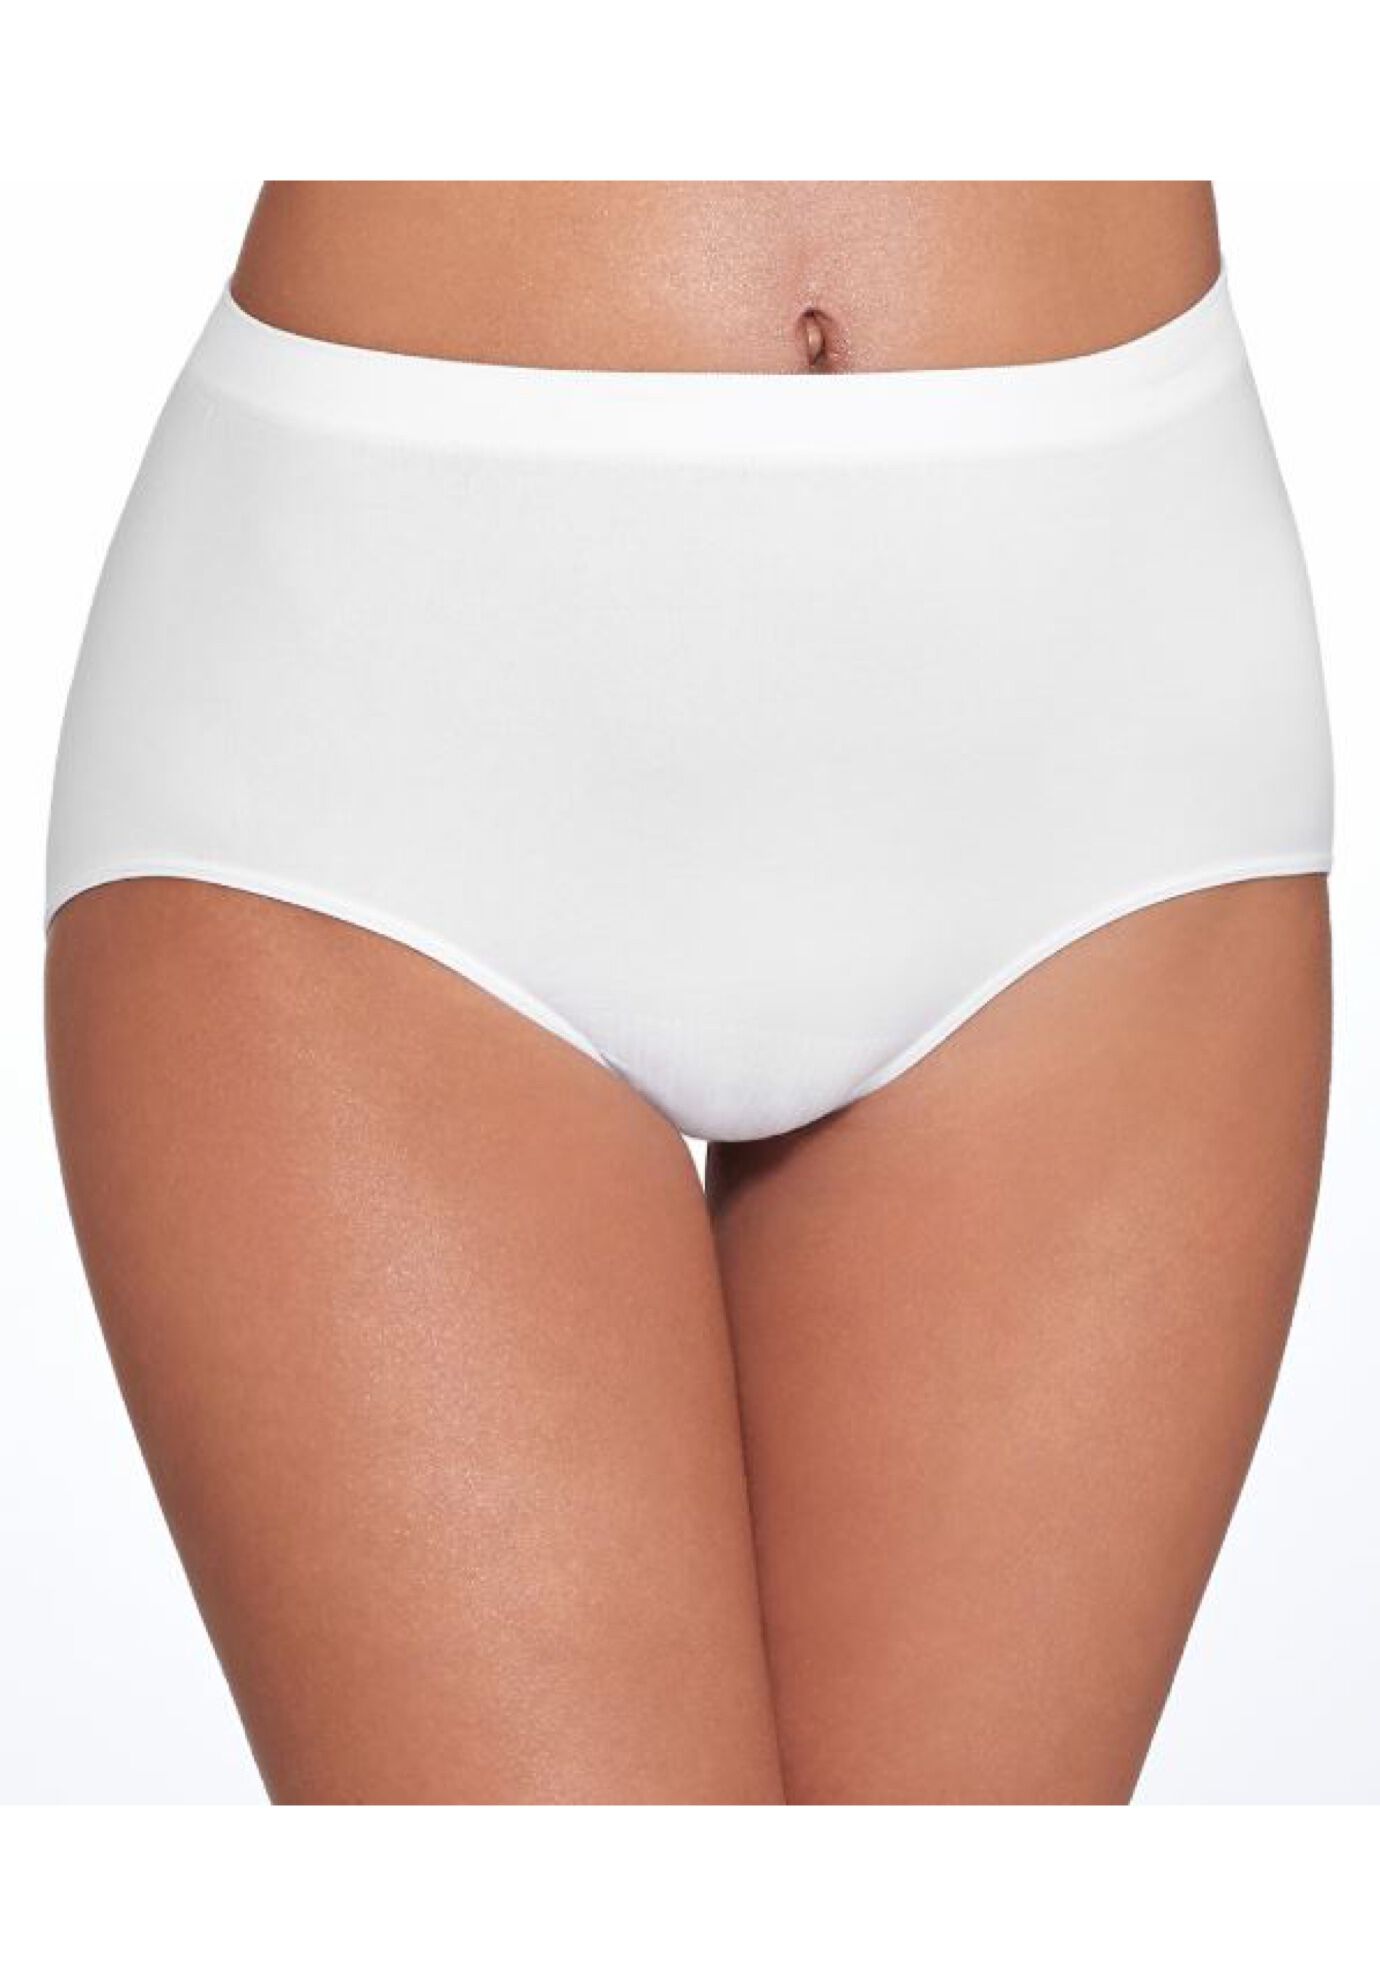 Plus Size Women's Comfort Revolution EasyLite&#8482; Brief by Bali in White (Size 8)